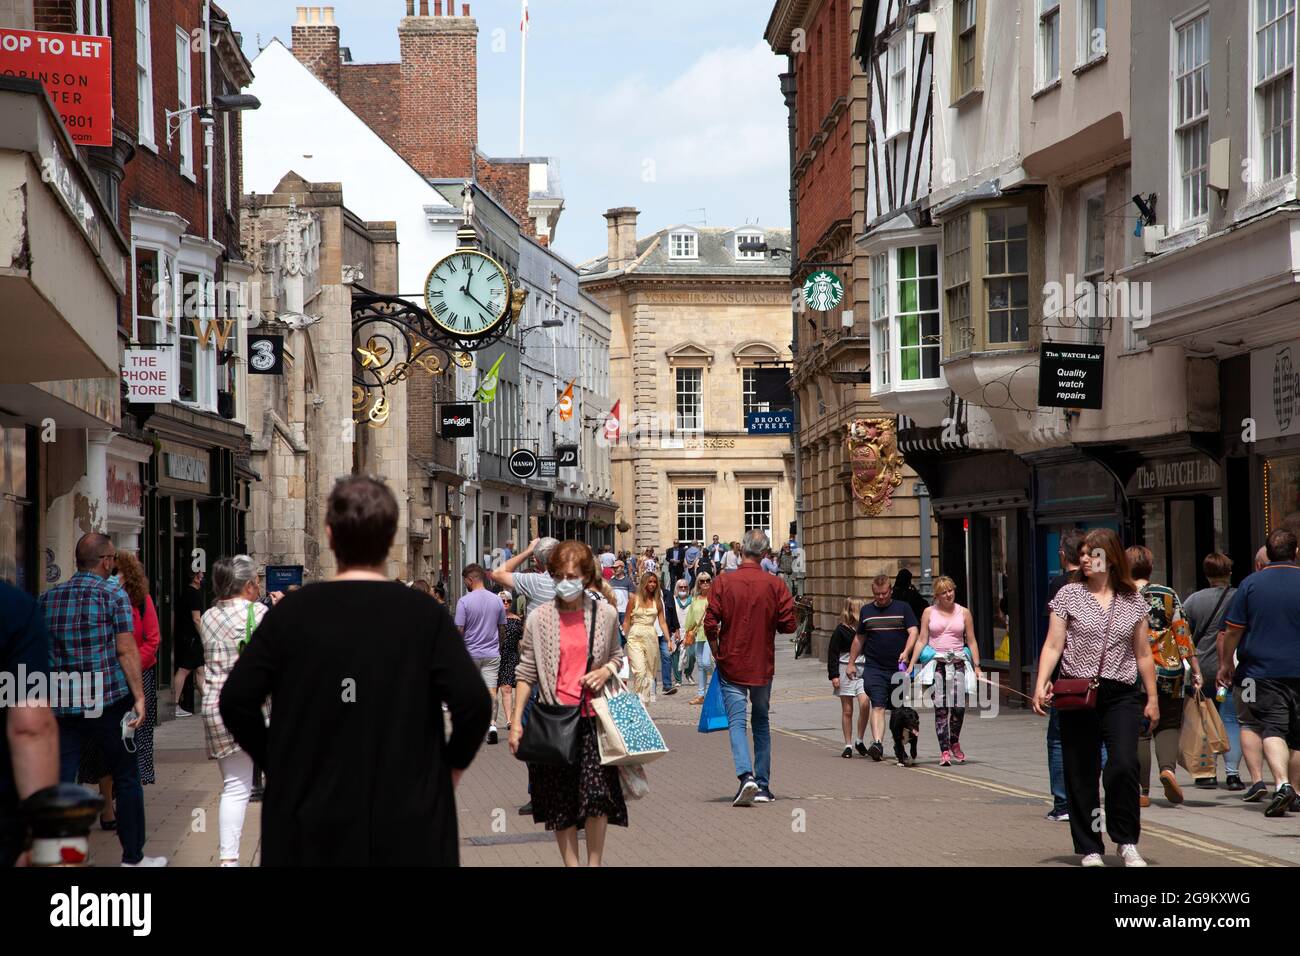 People Visiting Shops on Coney Street in York, UK Stock Photo